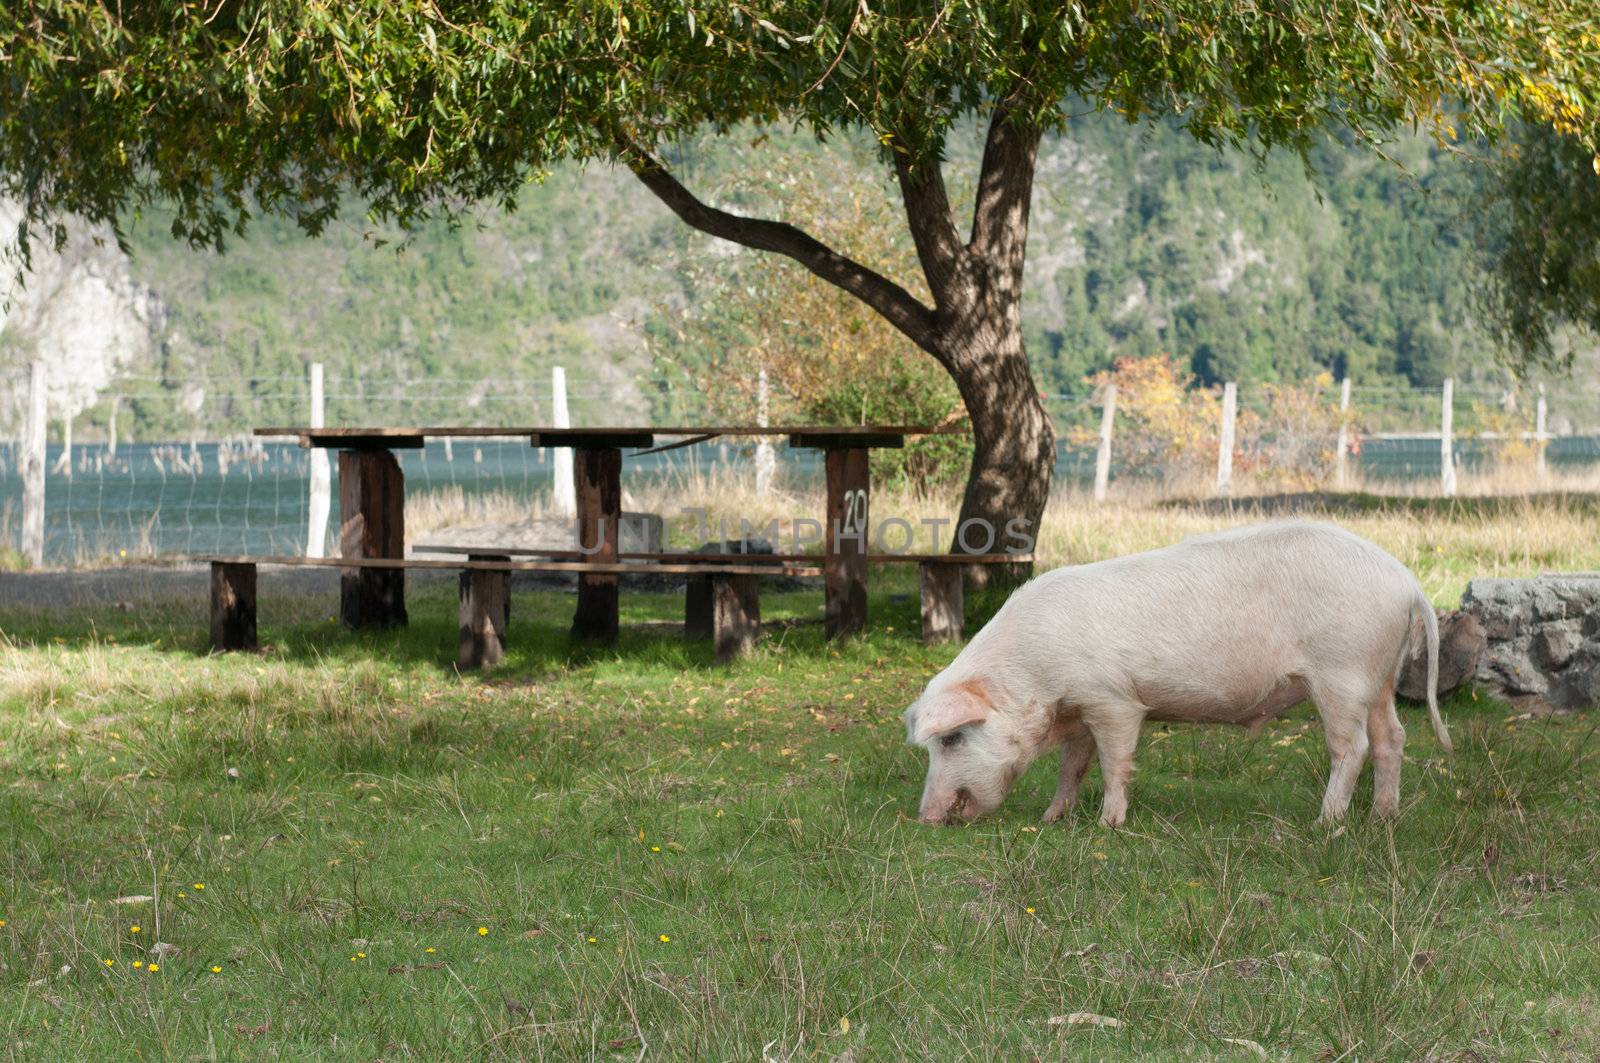 Picnic table and Pig